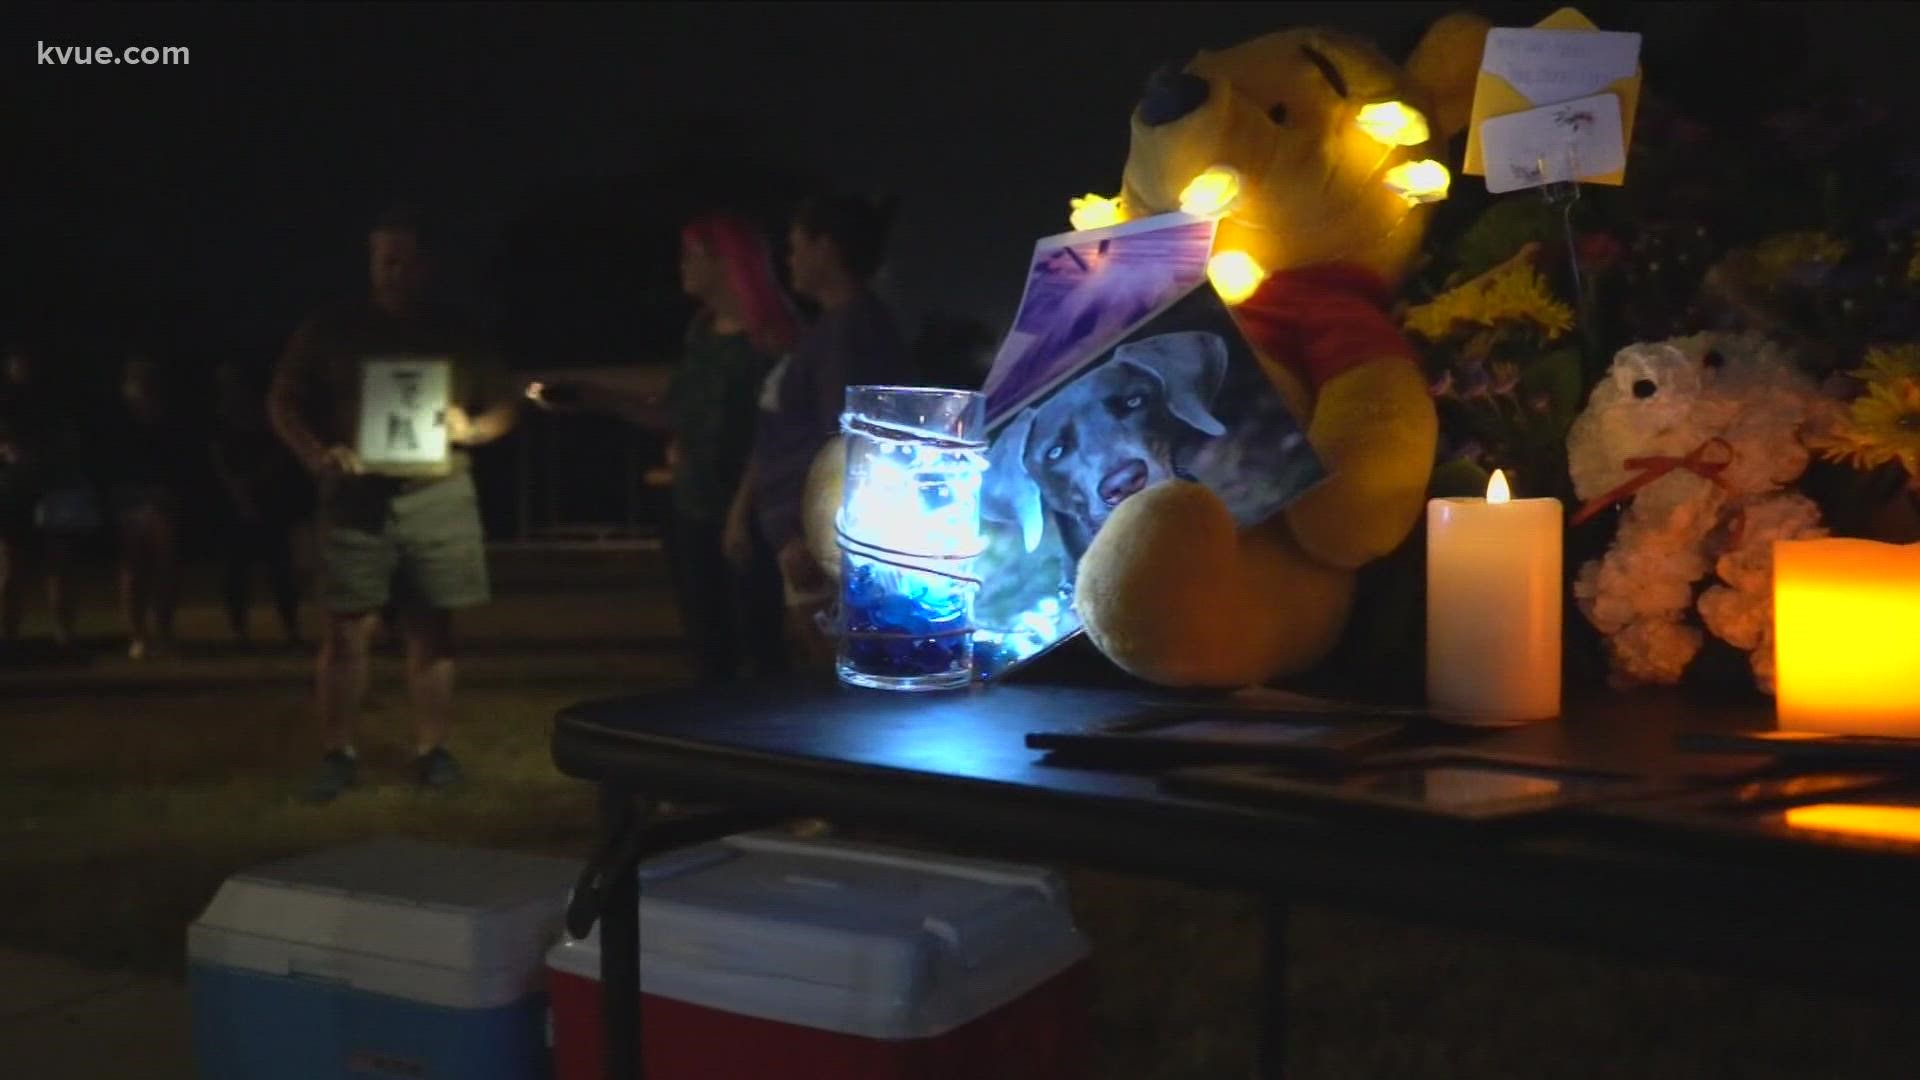 Georgetown families held a vigil to mourn the loss of dogs killed in the Ponderosa Pet Resort boarding facility fire. The families are hoping they can heal together.